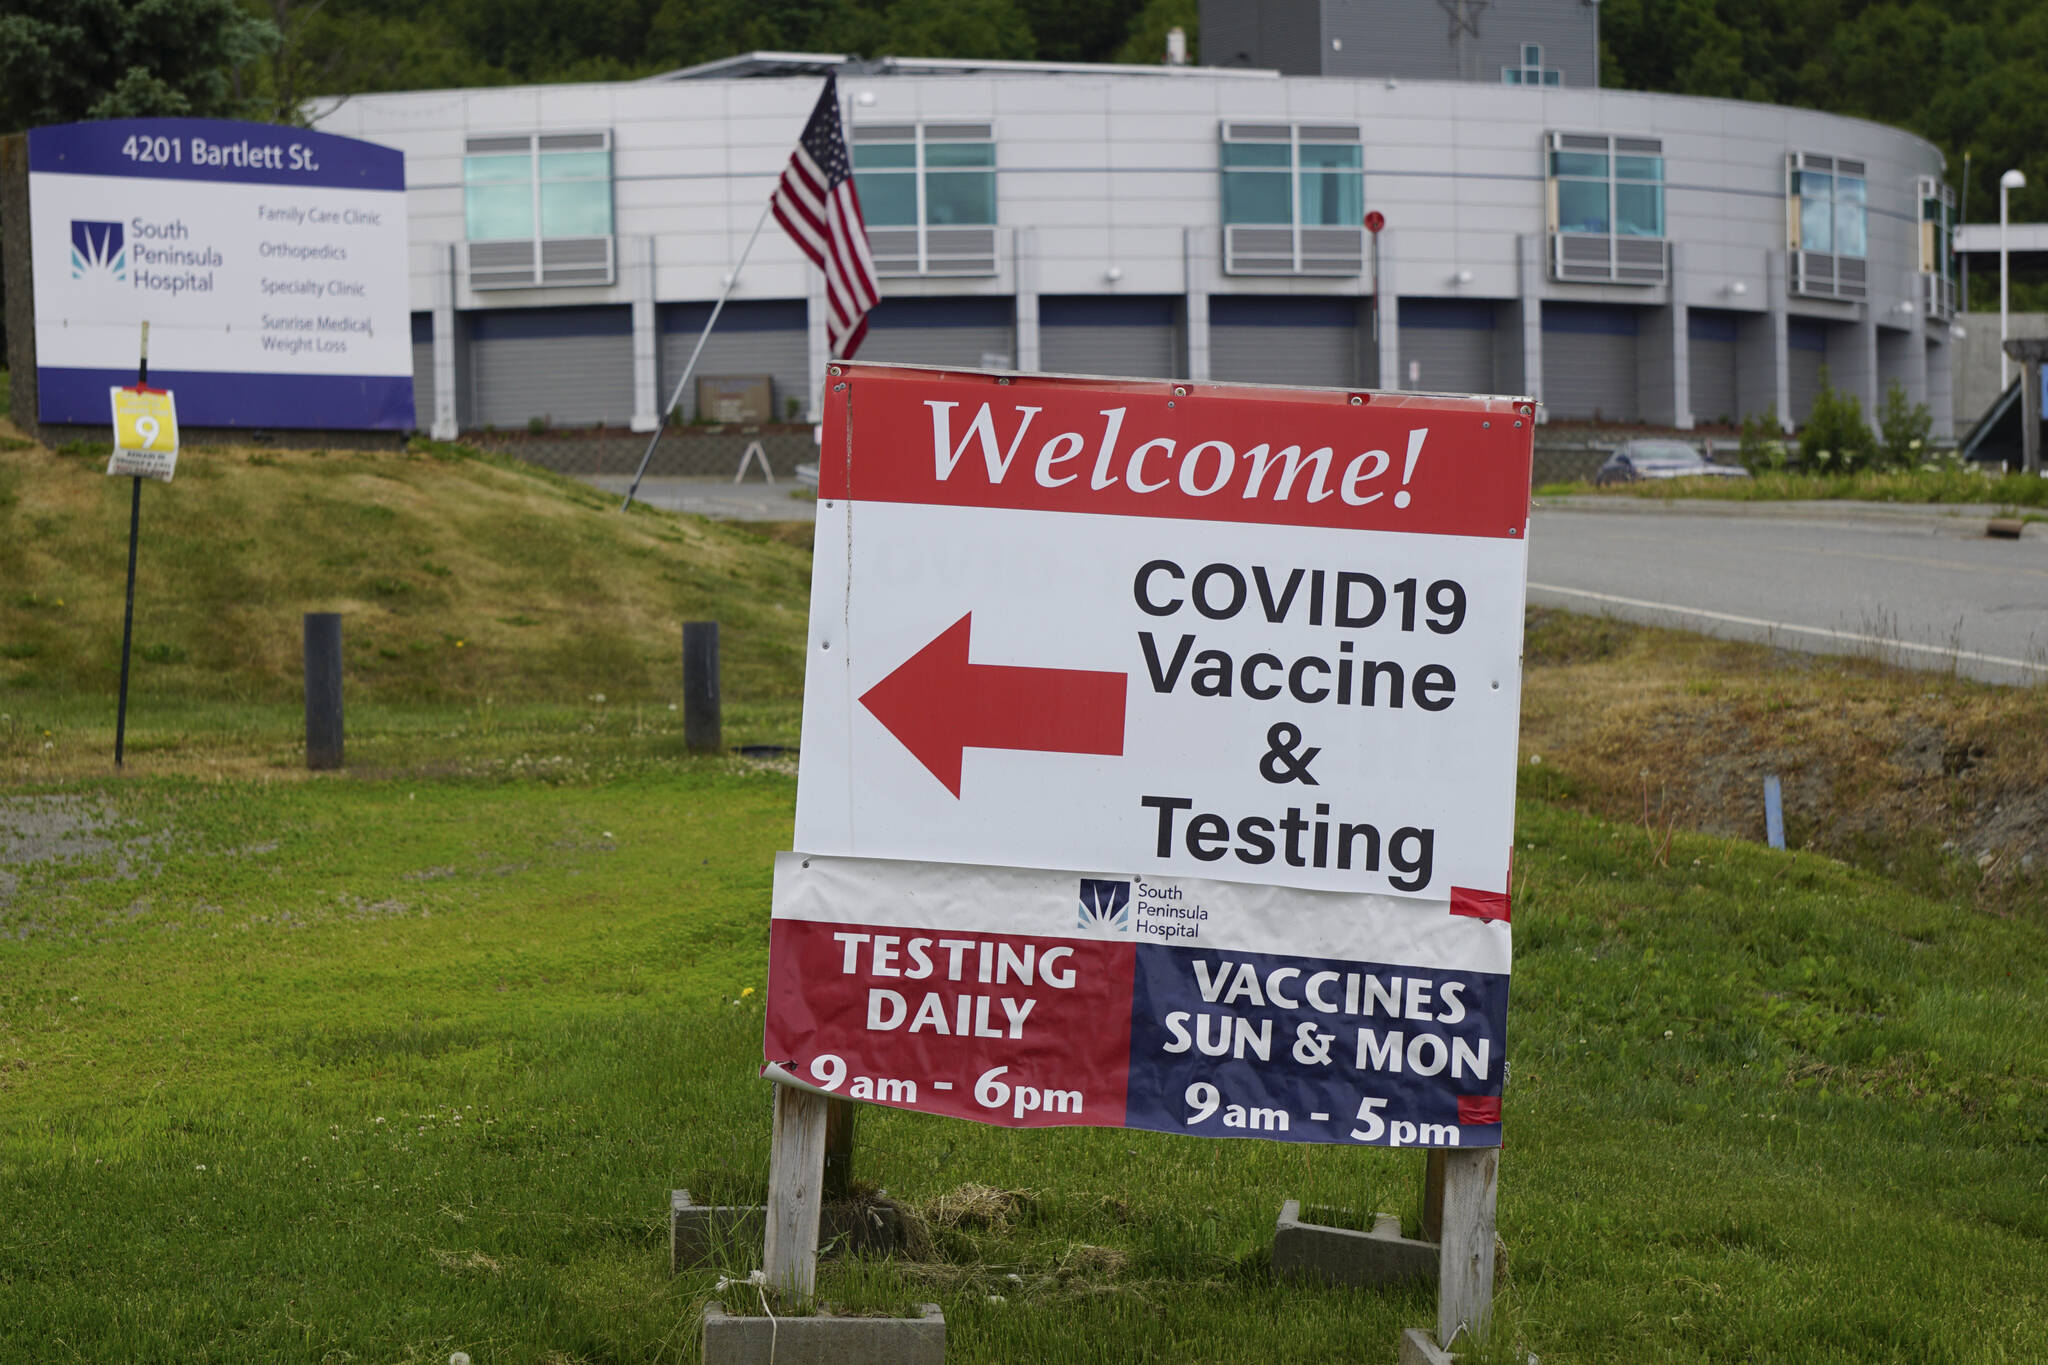 A sign points the way to the South Peninsula Hospital COIVD-19 testing and vaccine clinic at 4201 Bartlett Street on Flag Day, Tuesday, June 14, 2022, in Homer, Alaska. (Photo by Michael Armstrong/Homer News)